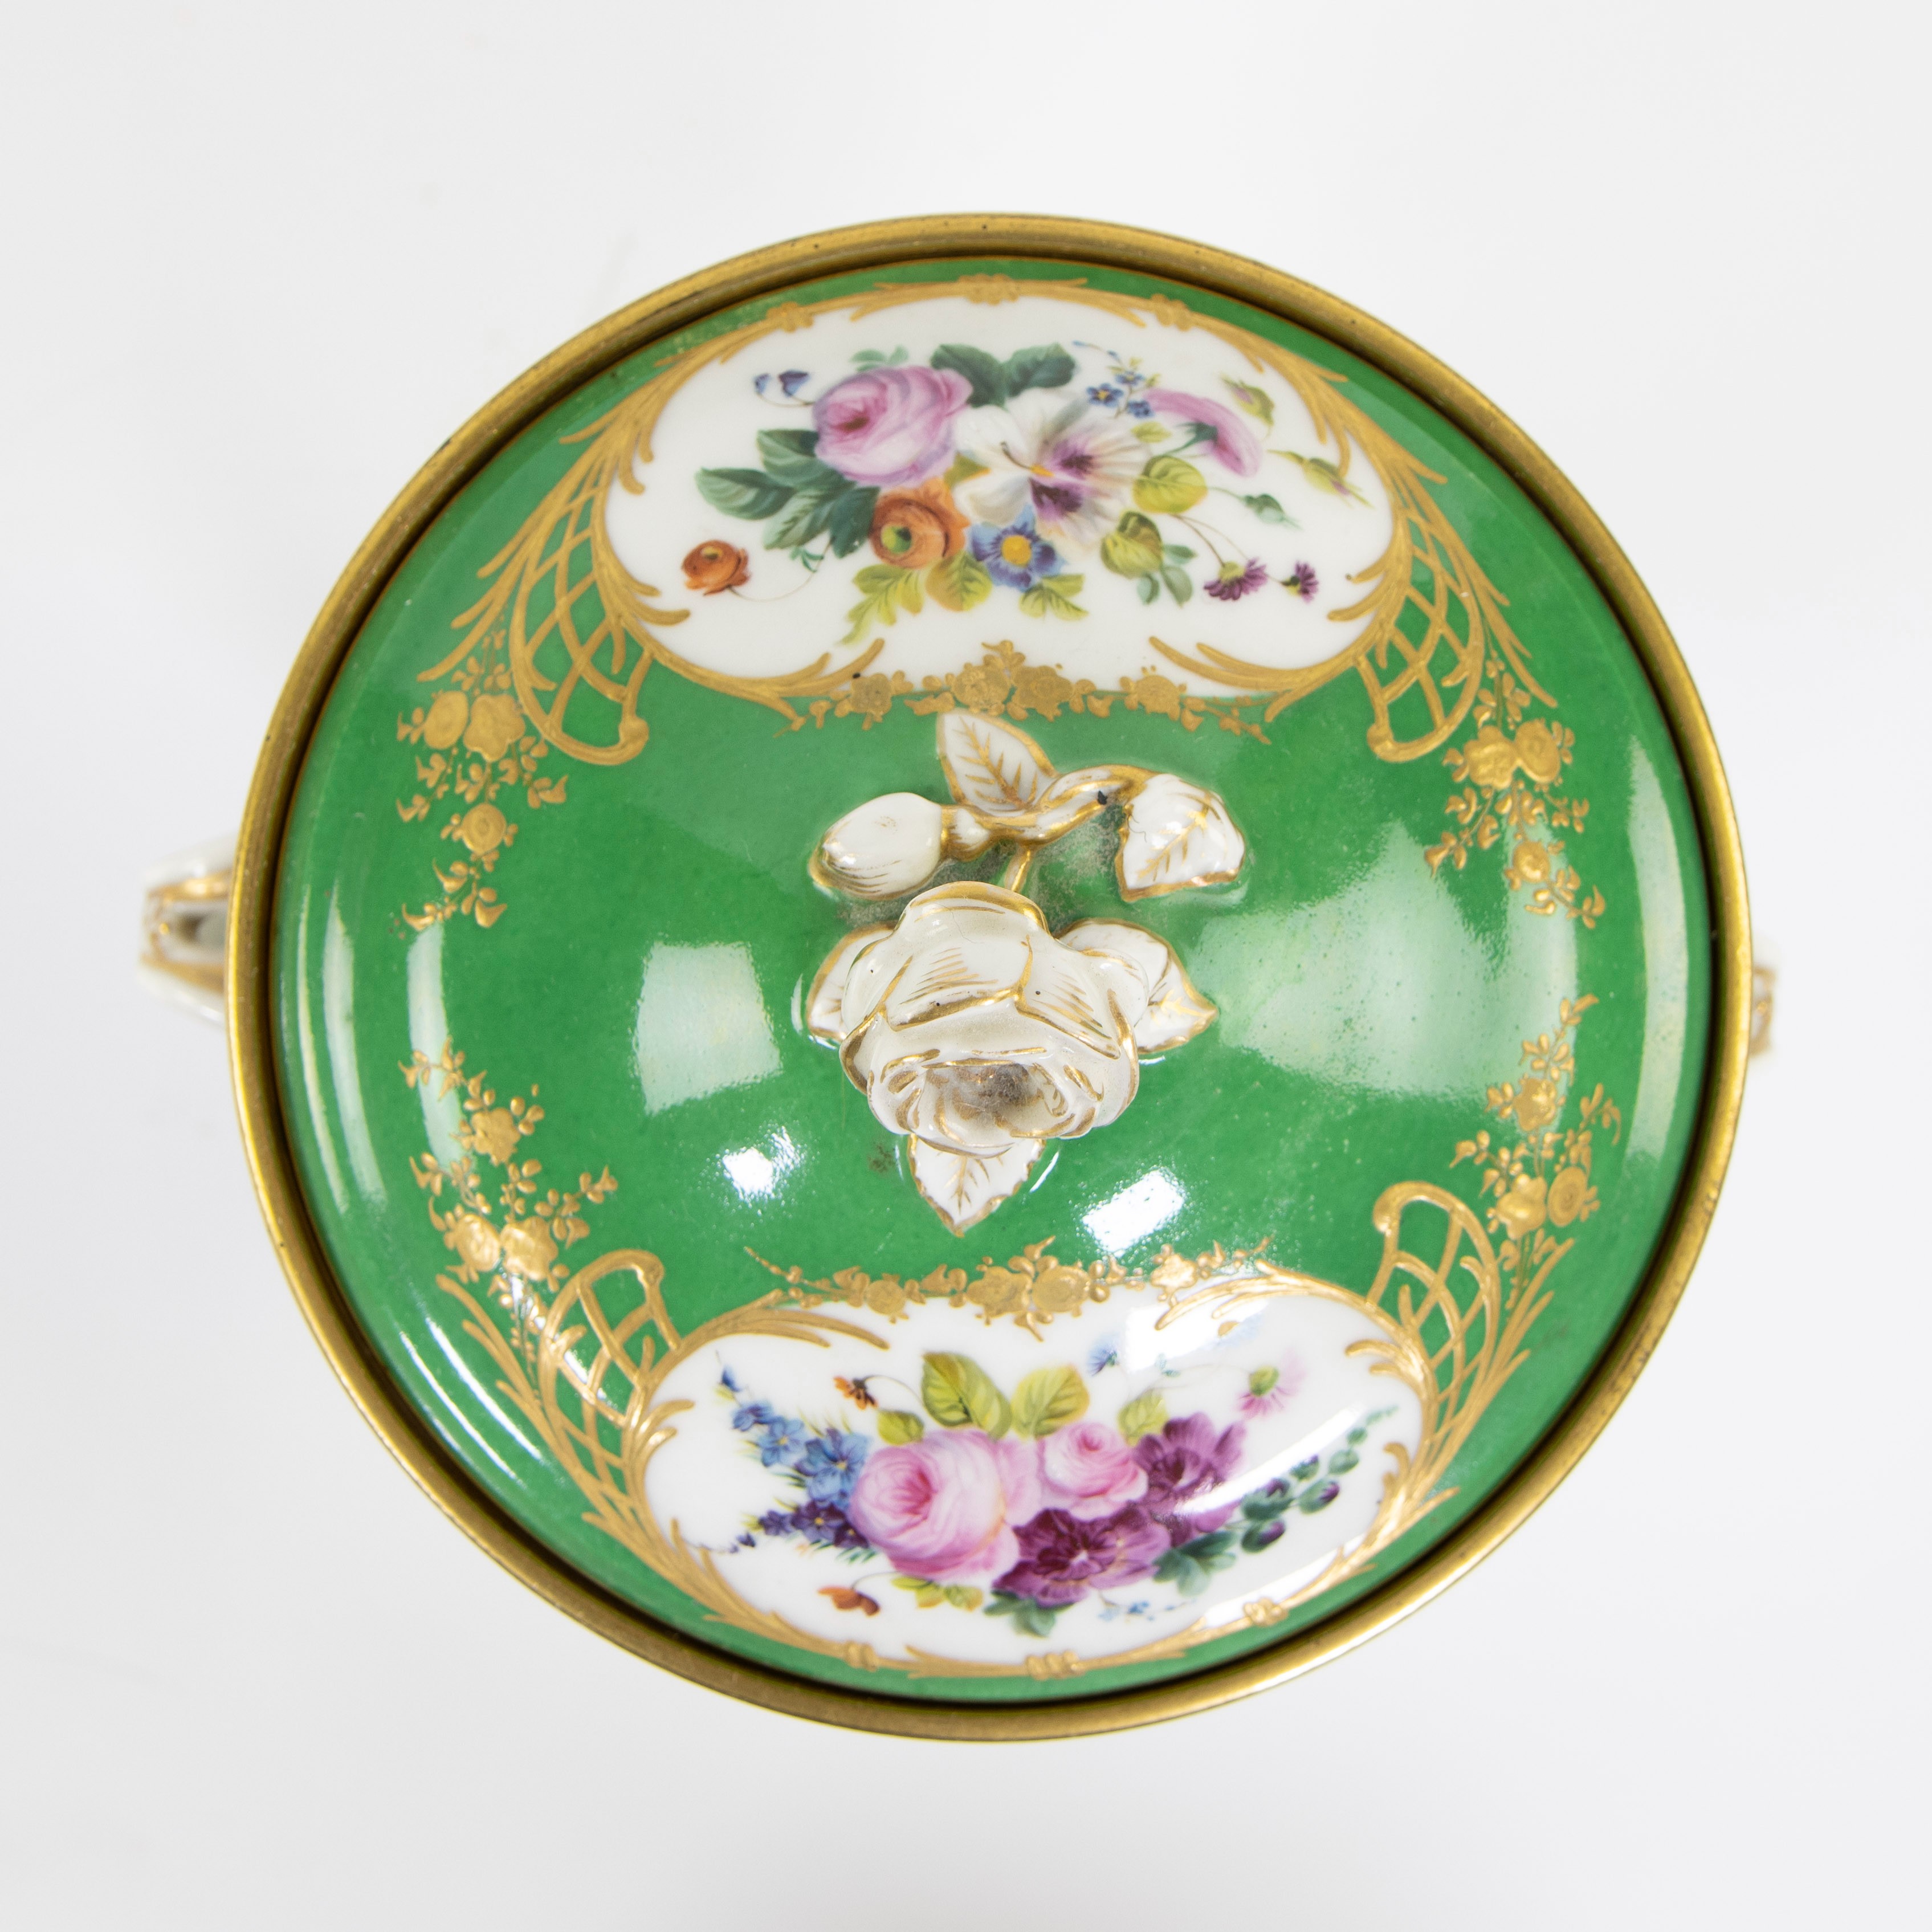 Porcelain table piece with gilt bronze fittings of rams' heads and bunches of grapes. Handpainted wi - Image 6 of 7